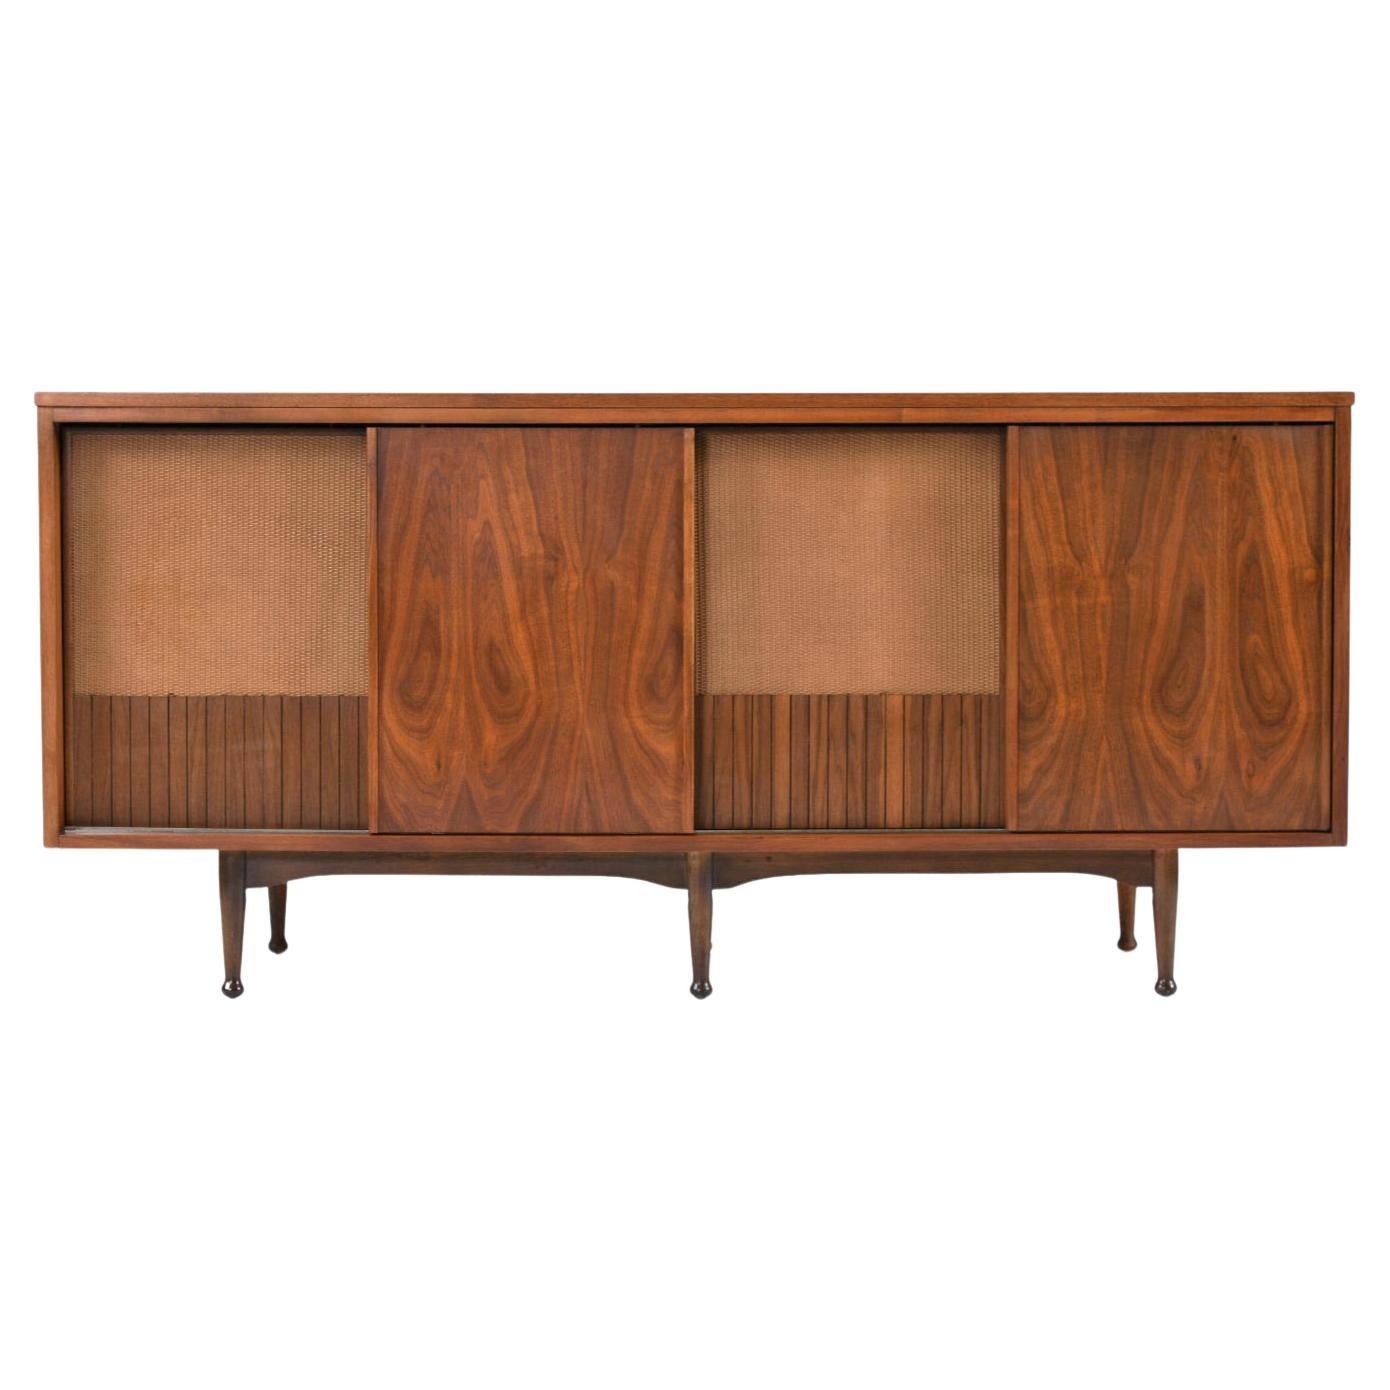 Mainline by Hooker Credenza. This rare find is a true Mid-Century Modern TV stand media center. The sliding doors allow easy access to the three bay entertainment center. The left and right sides both have open cabinet space with a single wood